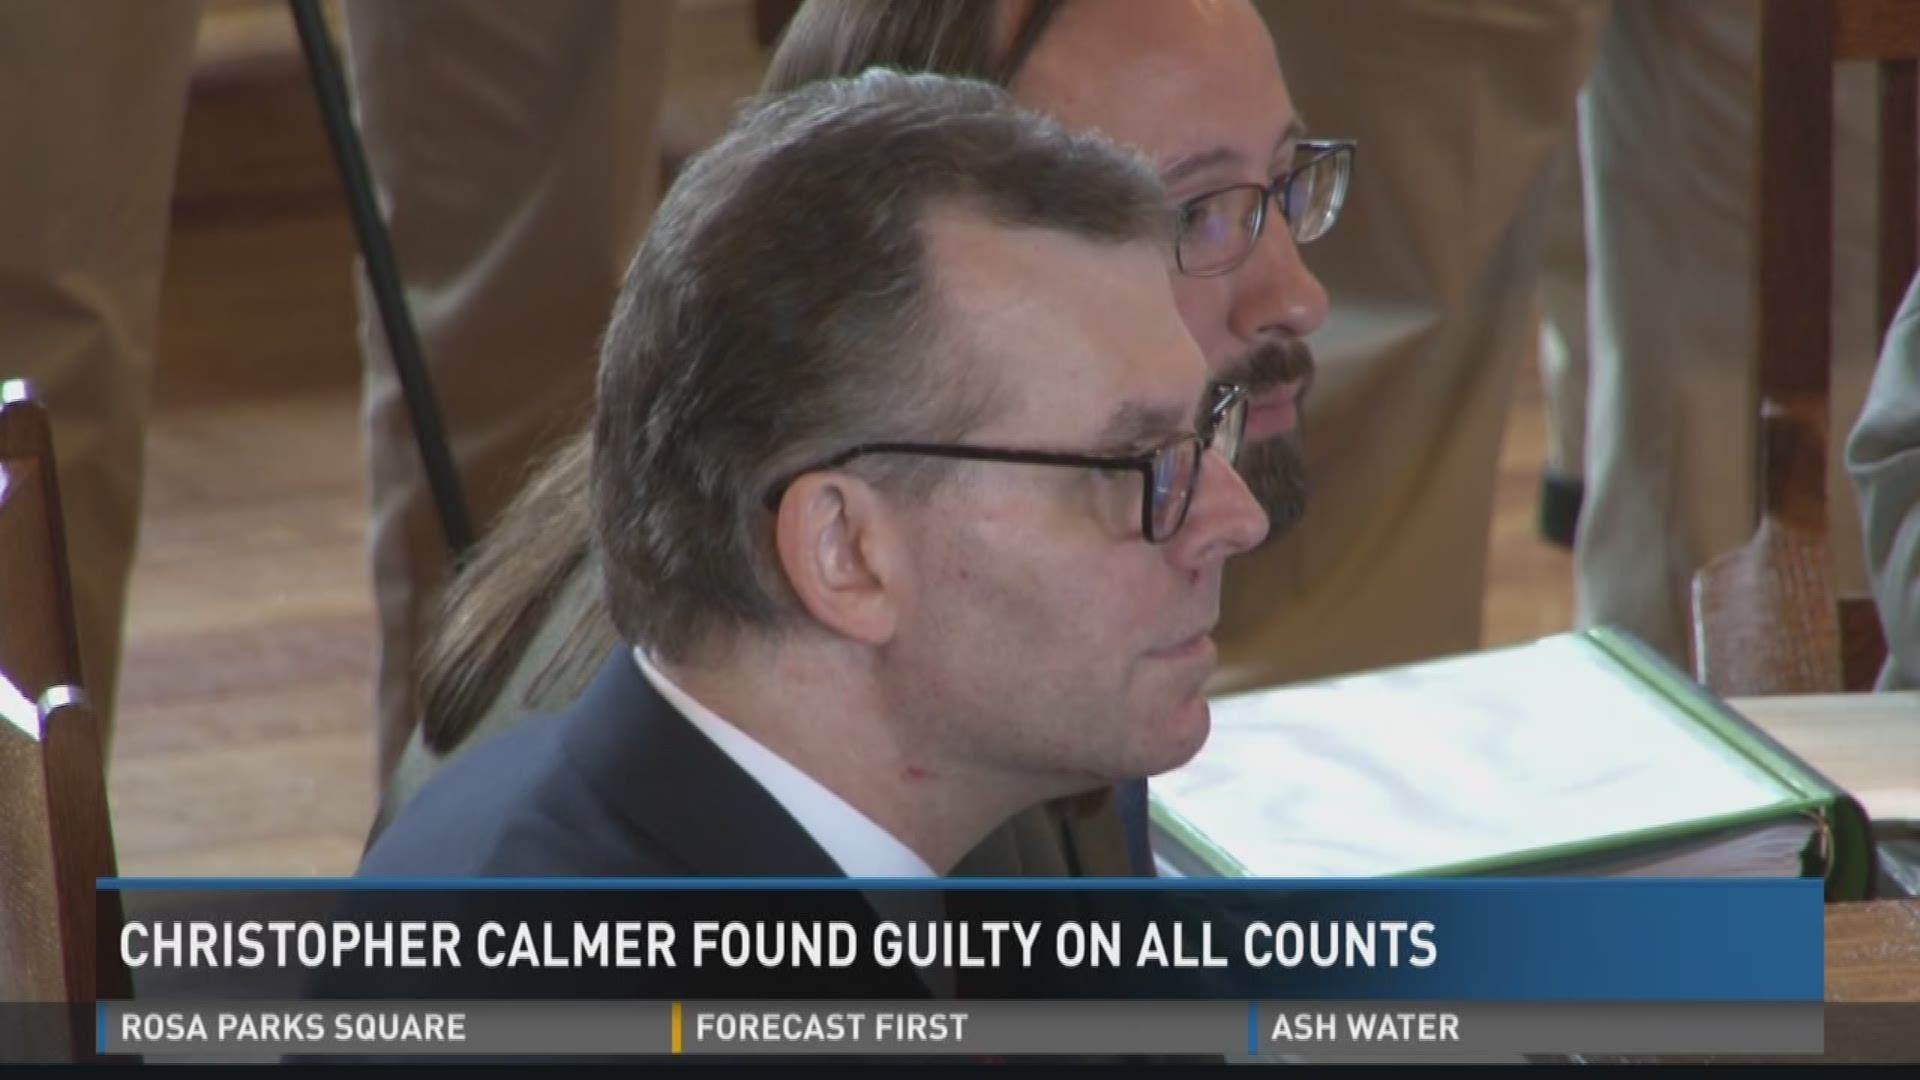 Calmer found guilty on all counts